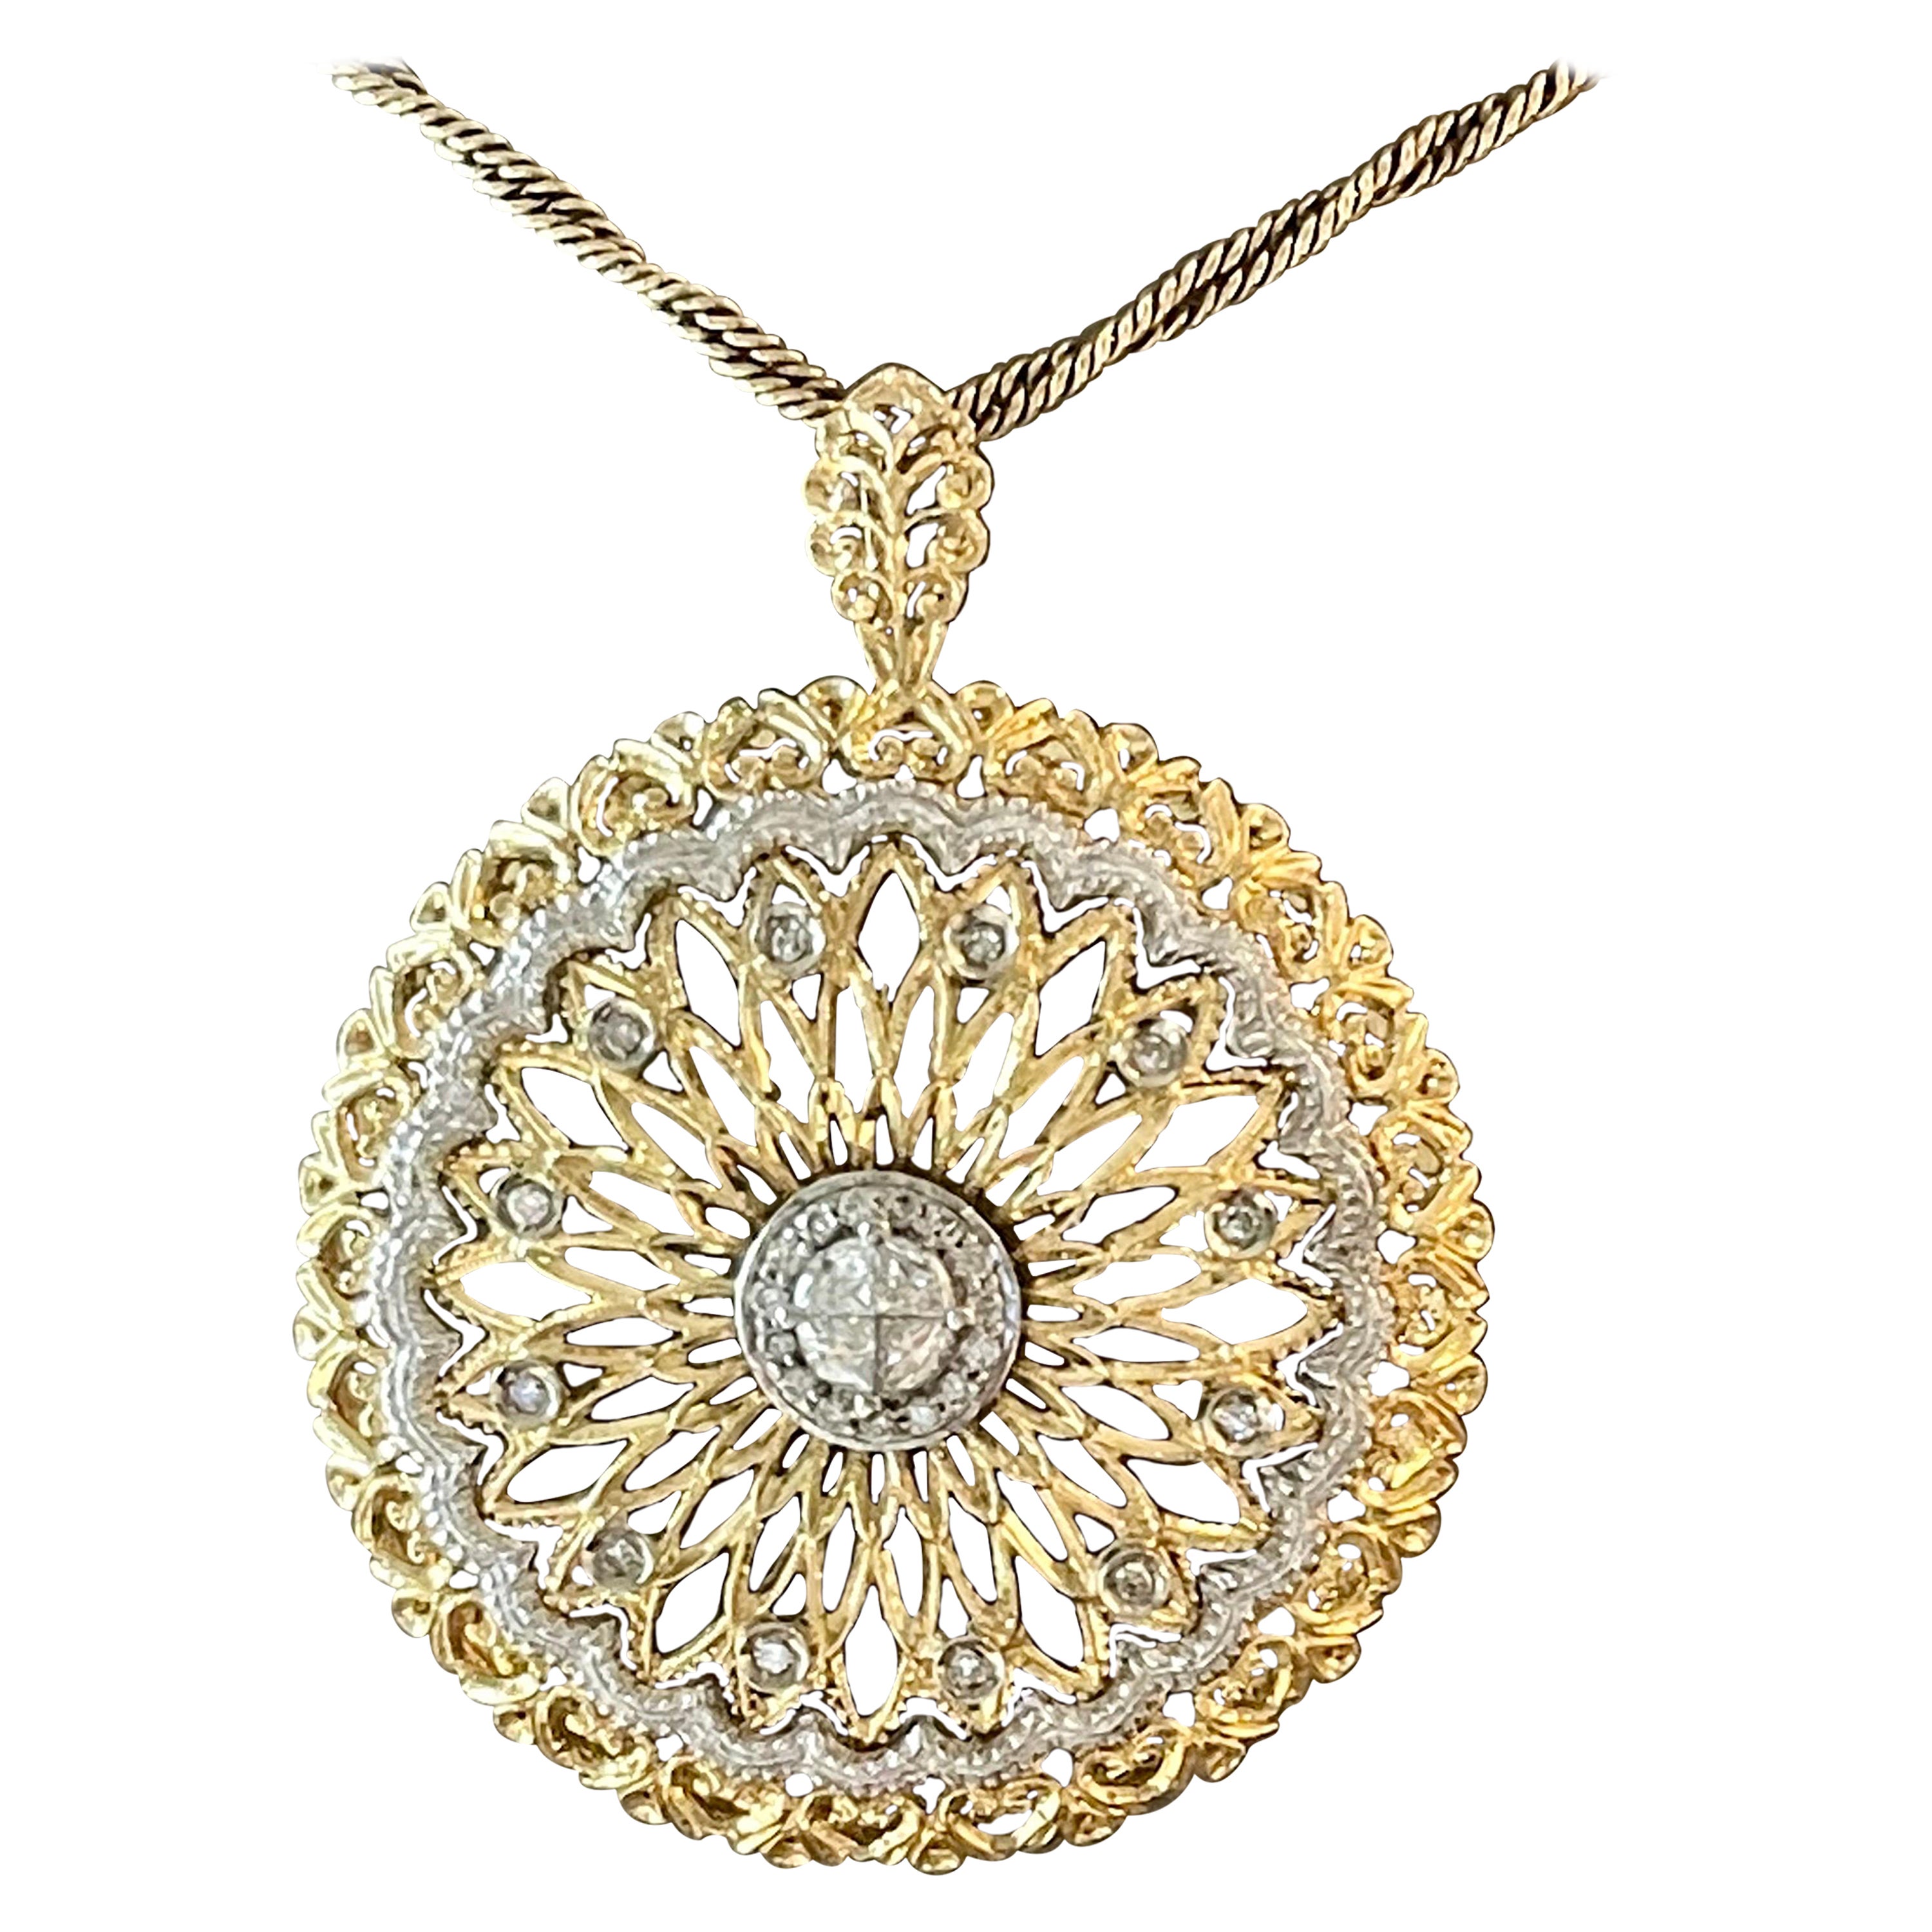 Vintage 8 K Yellow White Gold Diamond Pendant with Chain For Sale